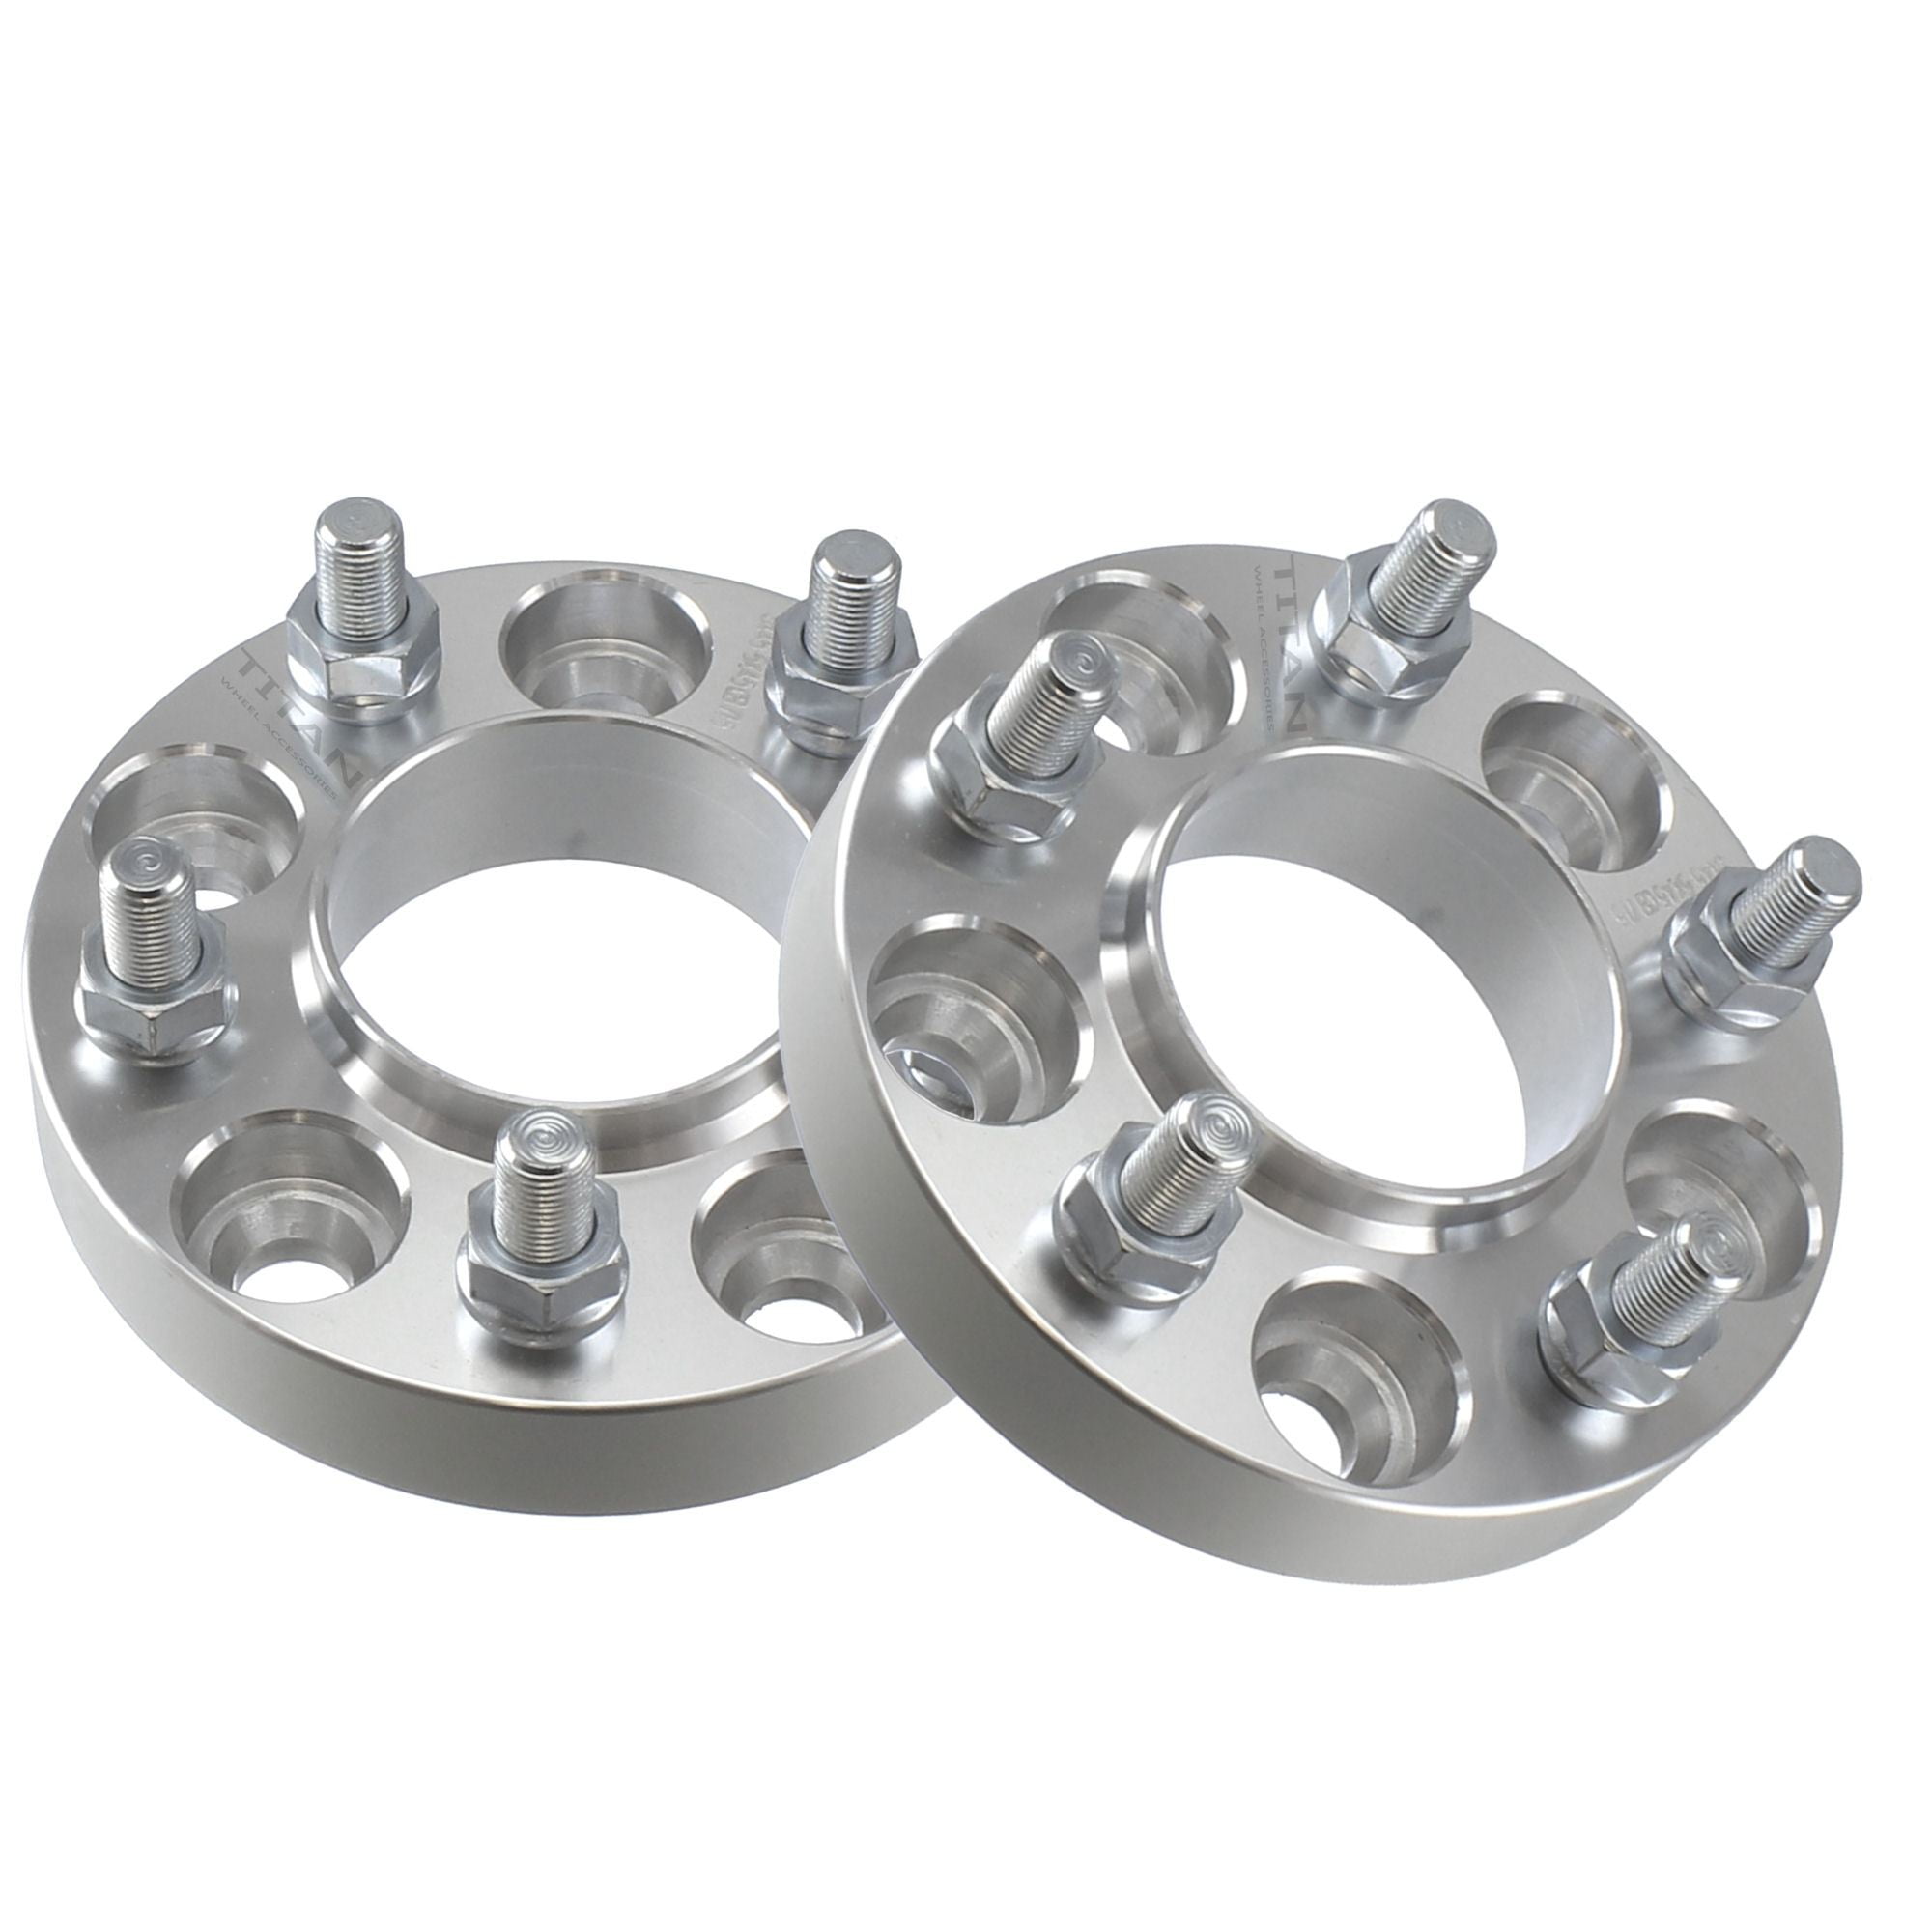 HUB CENTRIC 1.5" 38mm WHEEL ADAPTERS SPACERS 5x114.3 FOR ECLIPSE LANCER EVO 